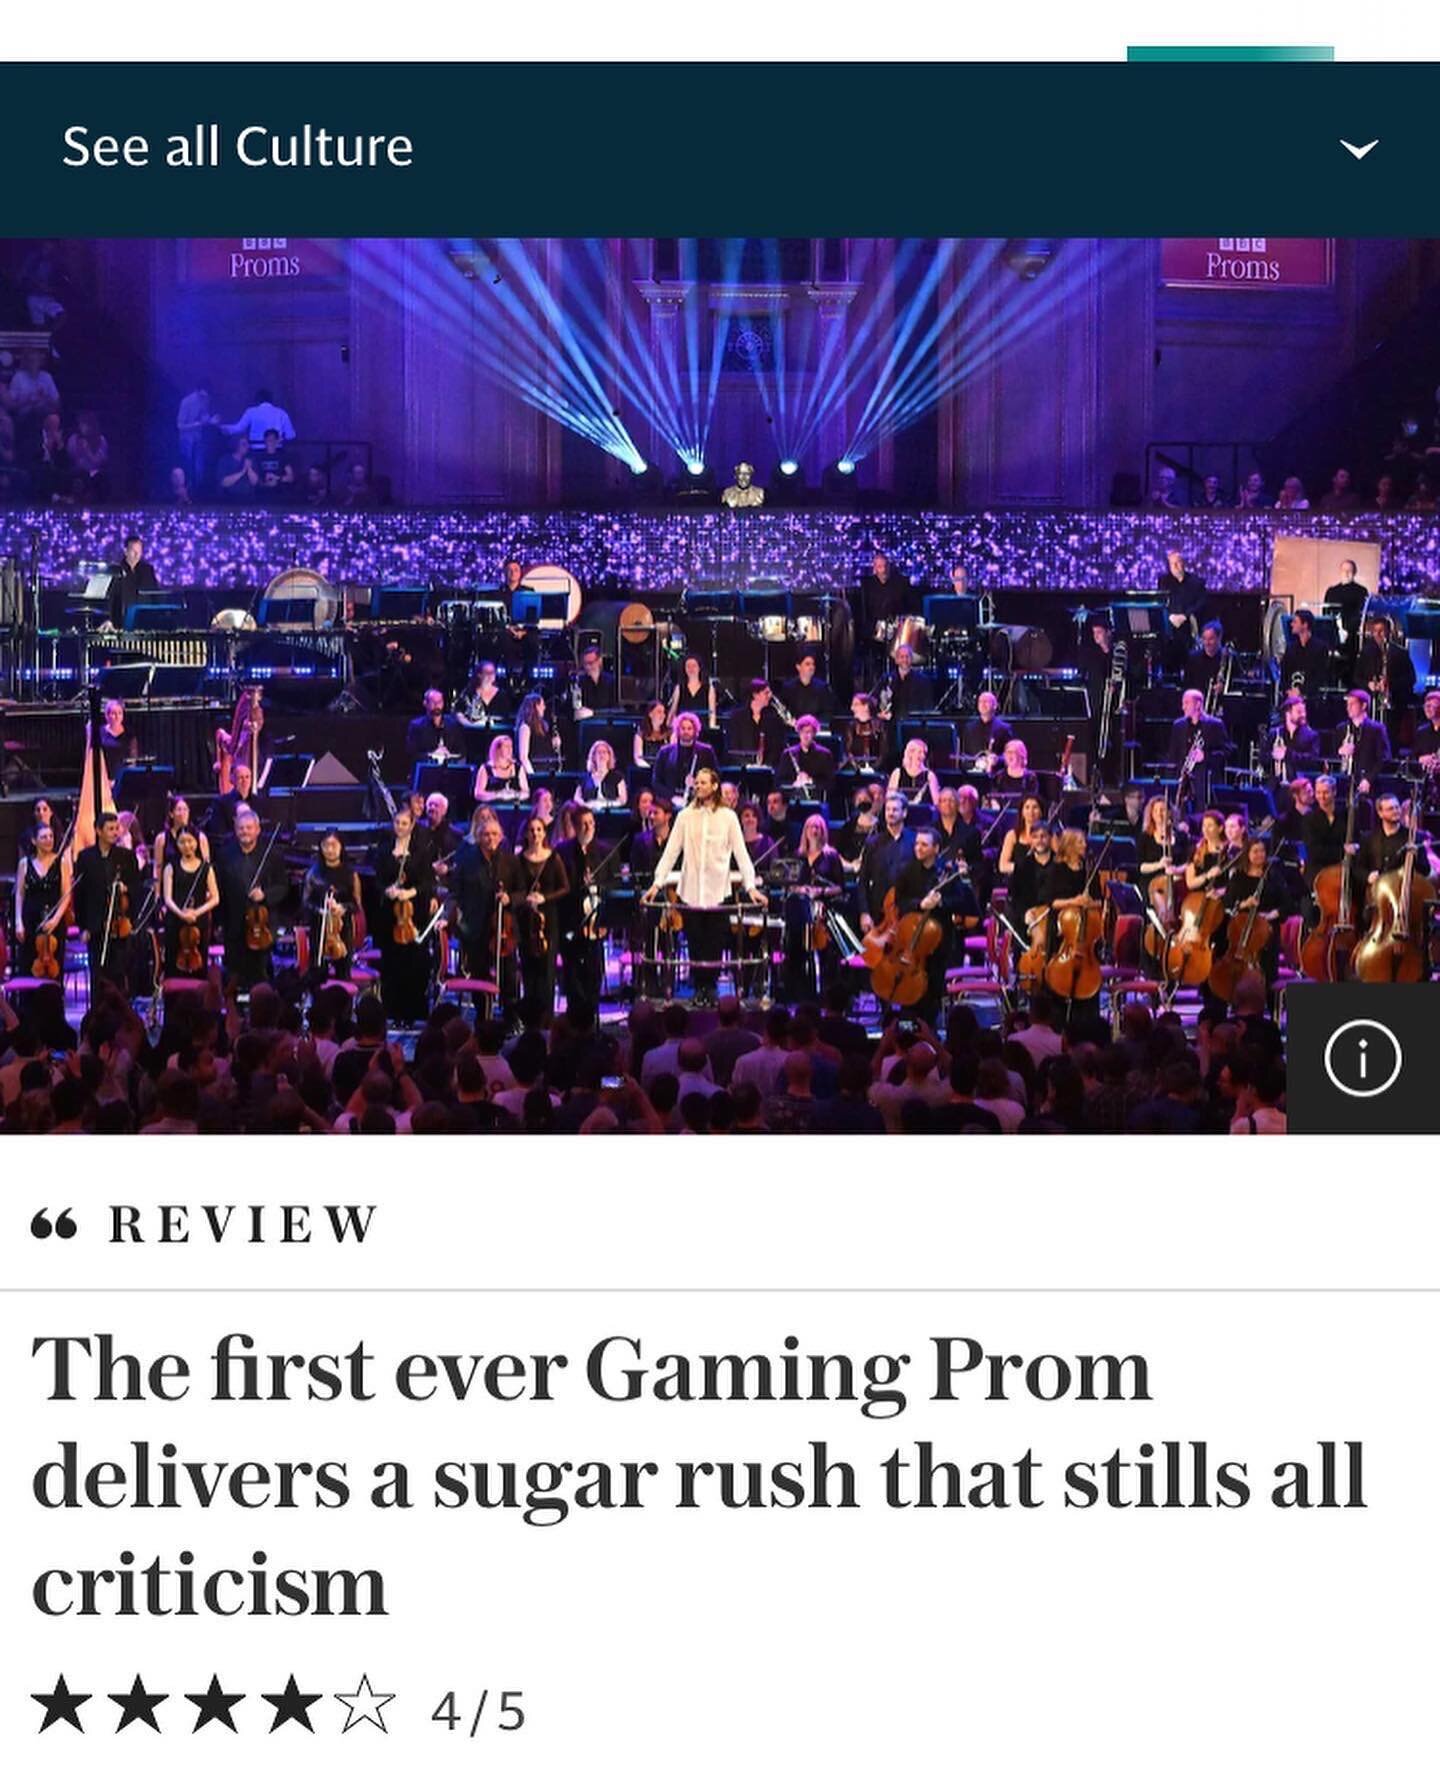 Reviews are out for @robertamesmusic First ever Gaming @bbc_proms with @royalphilorchestra 🔥🔥